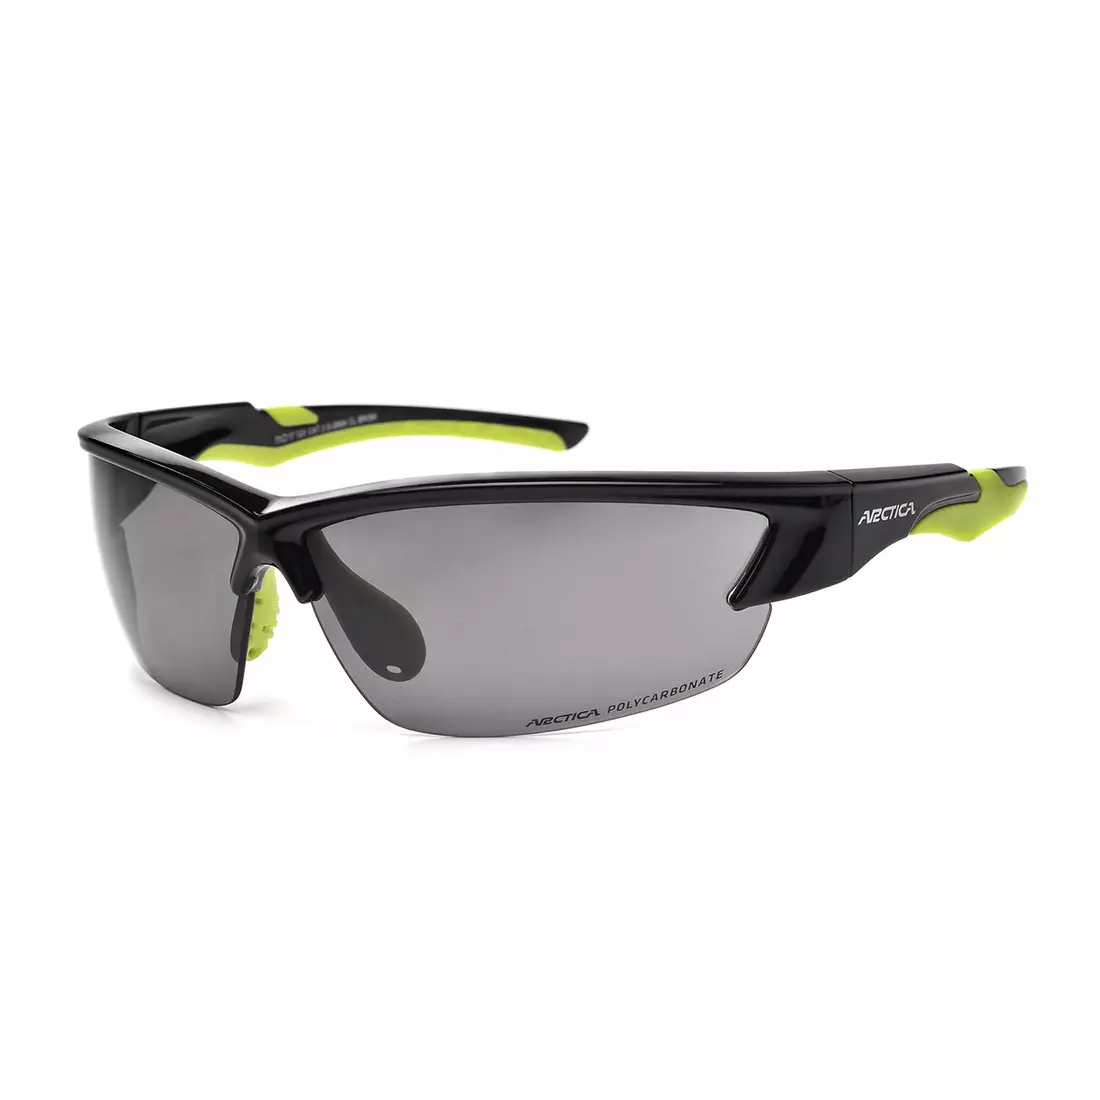 ARCTICA S-285A cycling/sports glasses